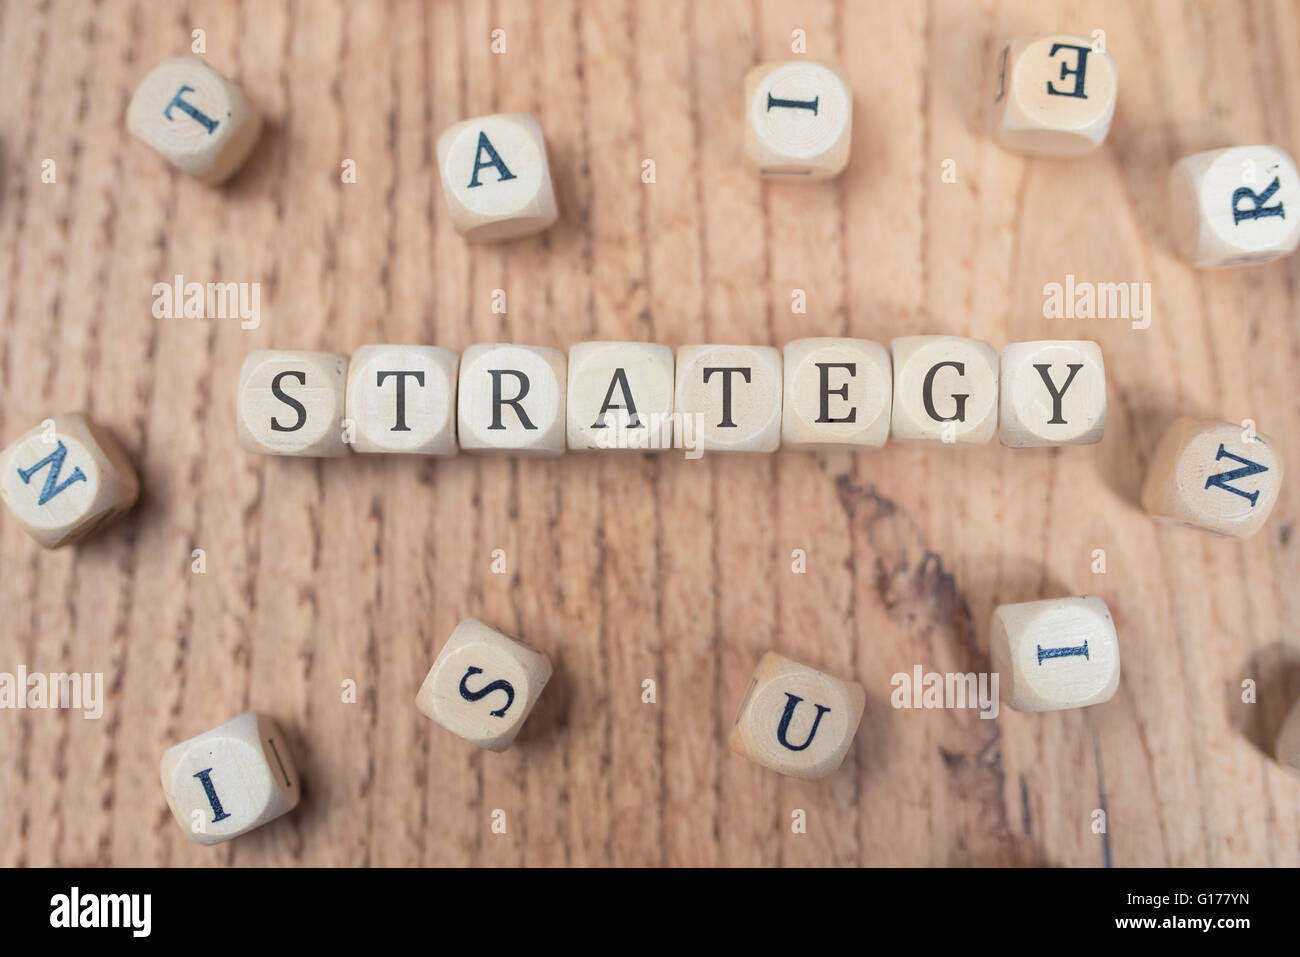 Strategy word with wooden cubes Stock Photo